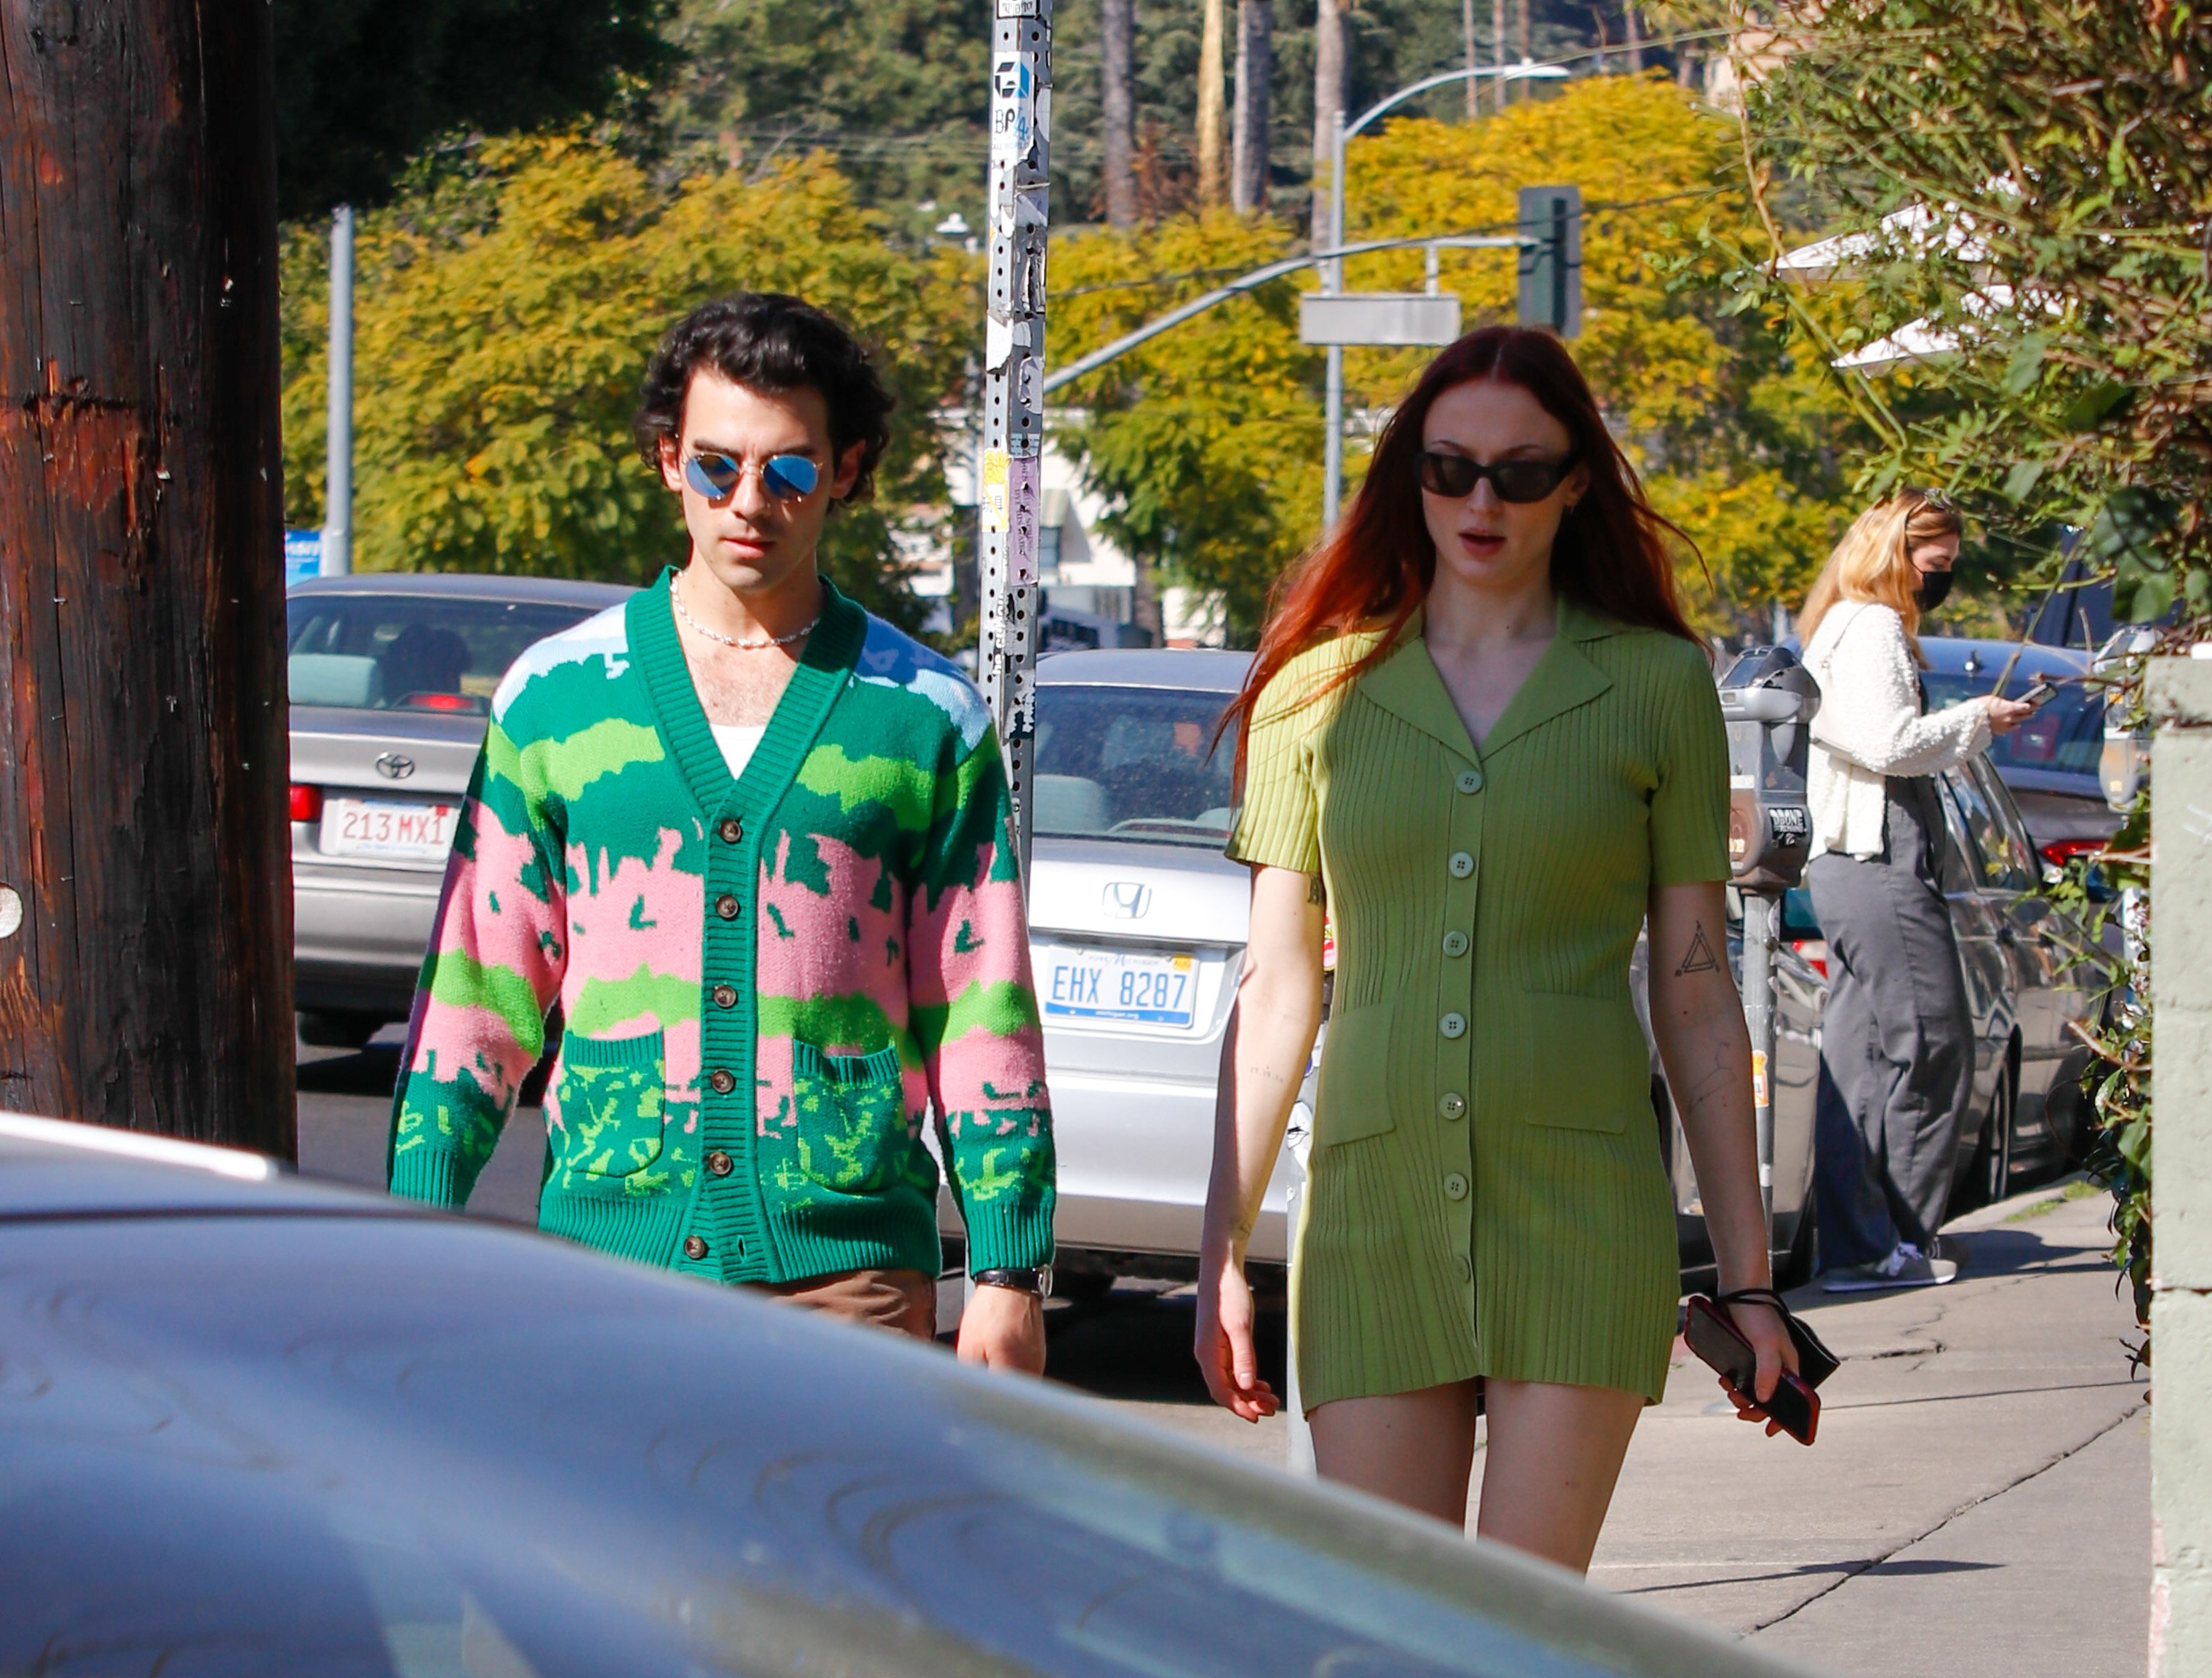 Jonas Brothers star Joe Jonas and Game of Thrones actor Sophie Turner take a walk together soon after the announcement of their second baby.